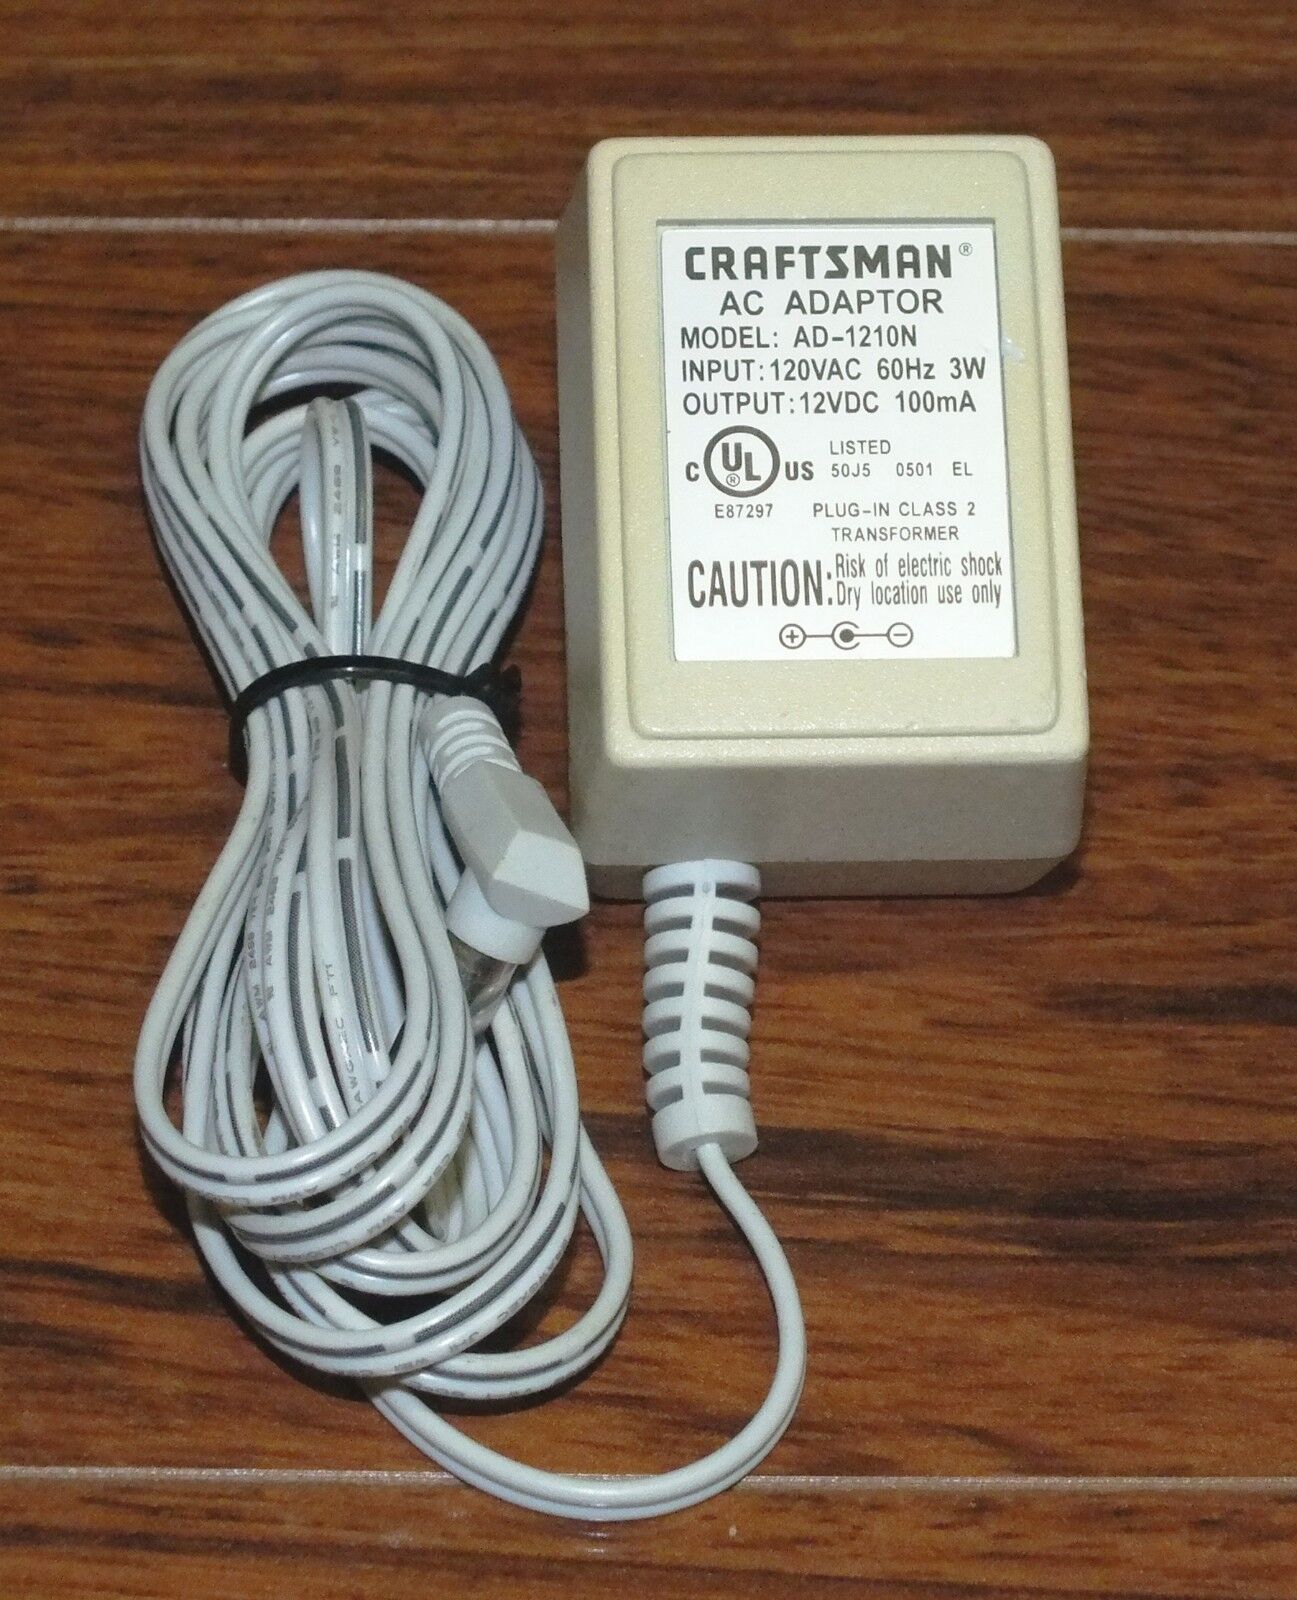 *Brand NEW*AC100-240V 50/60Hz Craftsman 12VDC 100mA AC DC ADAPTER AD-1210N POWER SUPPLY - Click Image to Close